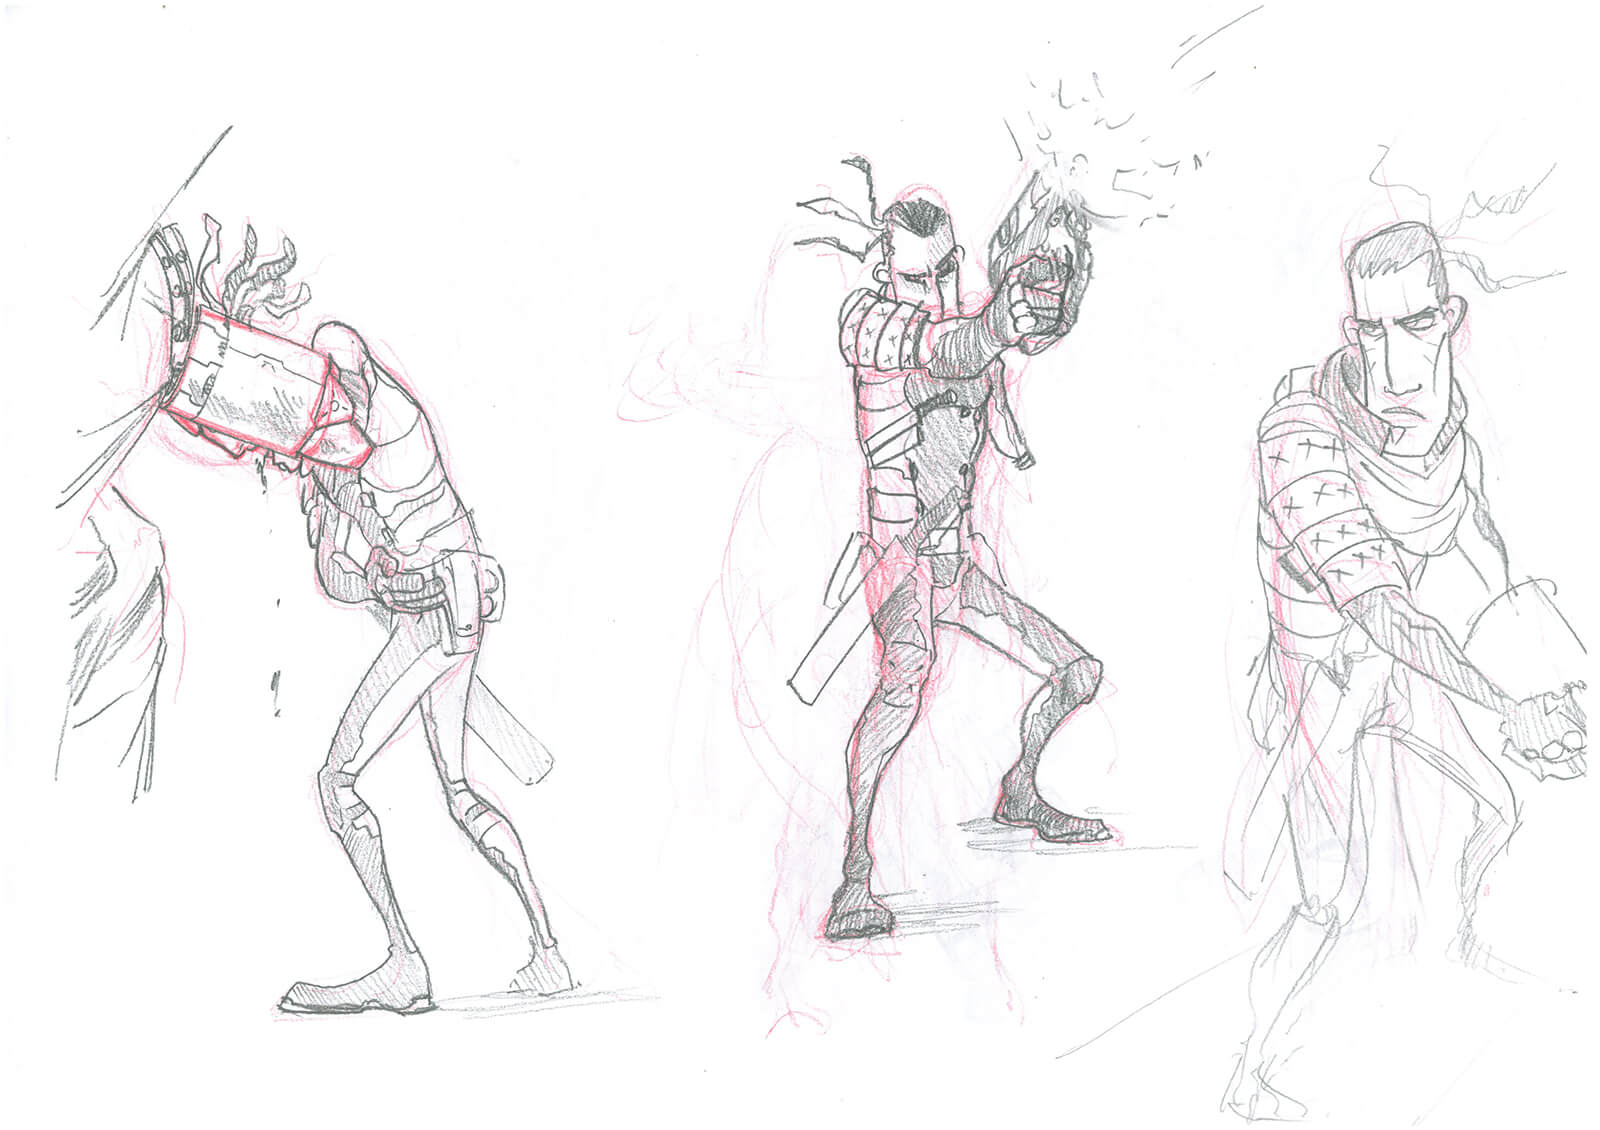 Red and black sketches of a tall, thin man in body armor leaning against a wall hurt, shooting, and glaring